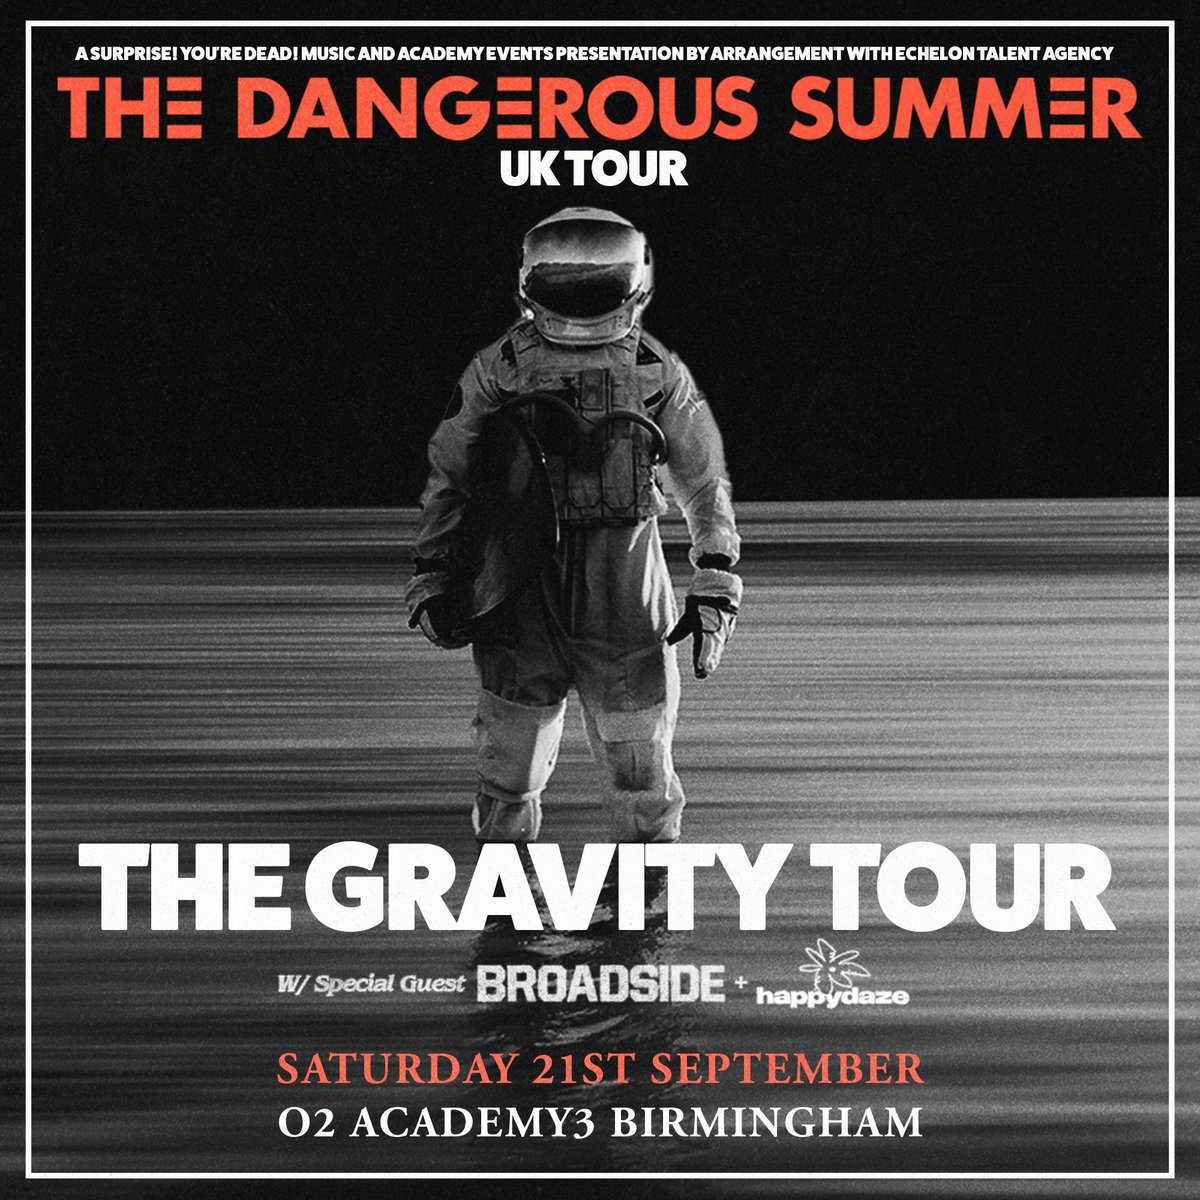 .@DangerousSummer return to the UK in support of their seventh full length LP ‘Gravity’, here on Saturday 21 September. Tickets available - amg-venues.com/xGJJ50RYFM3